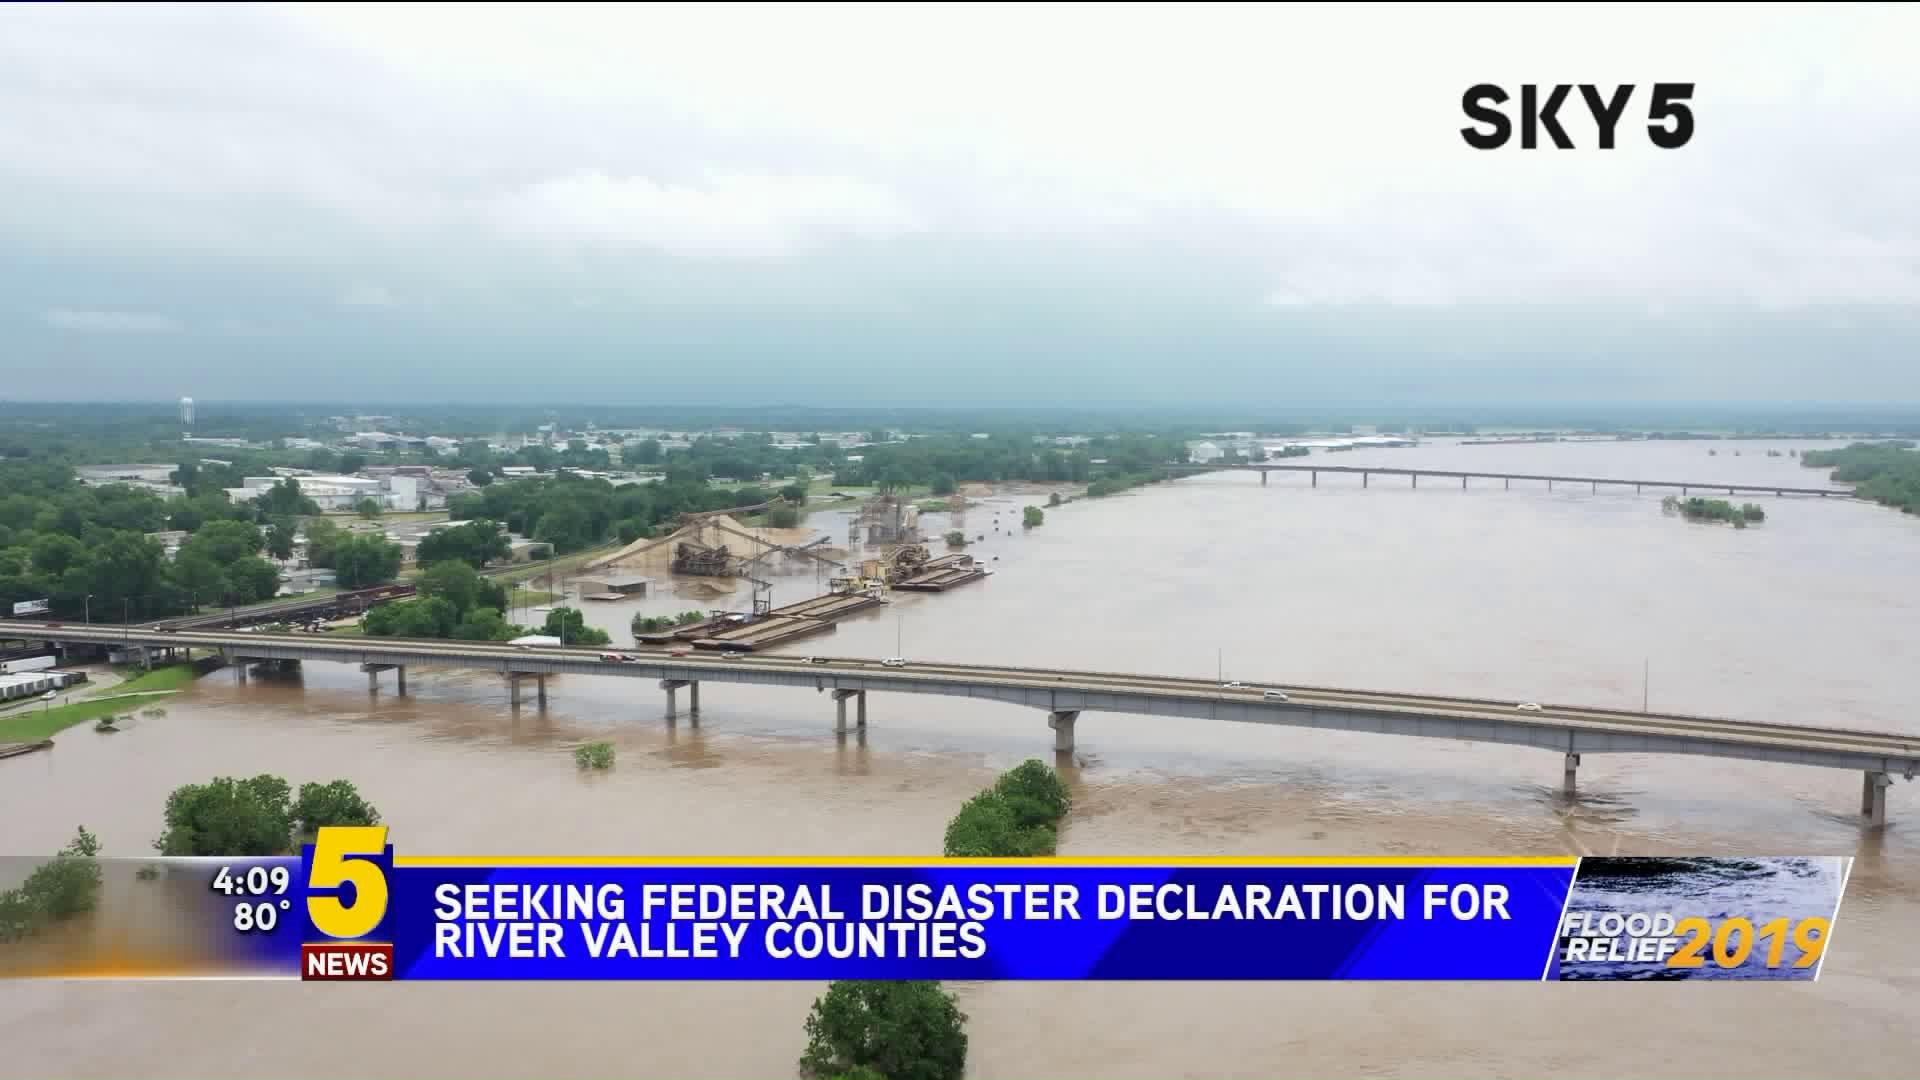 Seeking Federal Disaster Declarations for River Valley Counties